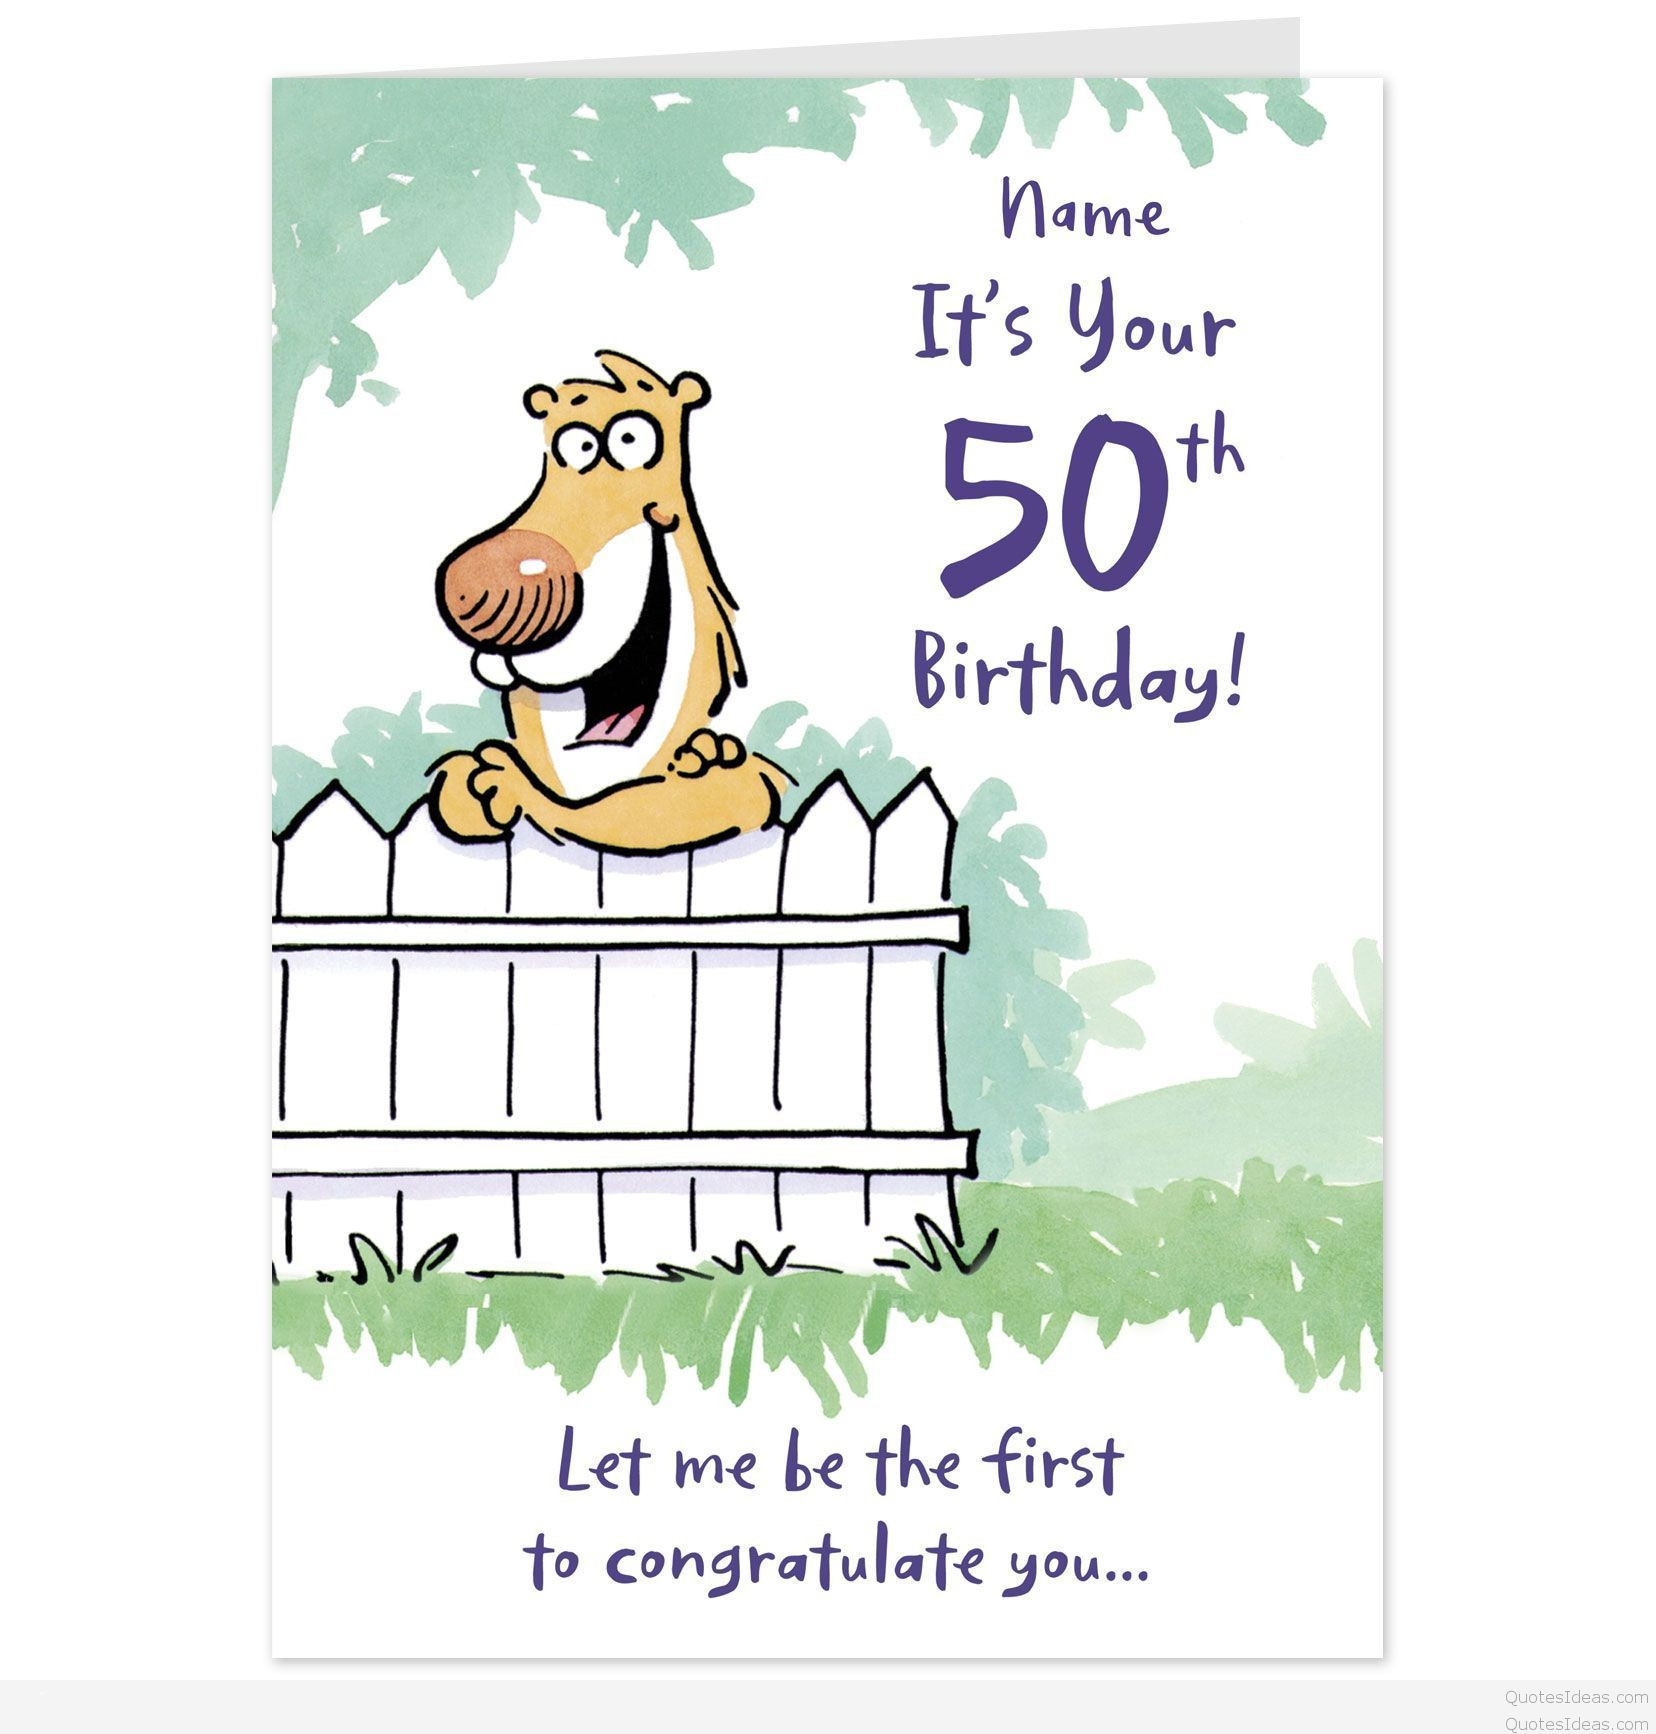 Funny Birthday Card Ideas For Friends Funny Birthday Cards For Friends Handmade Birthday Card Ideas For